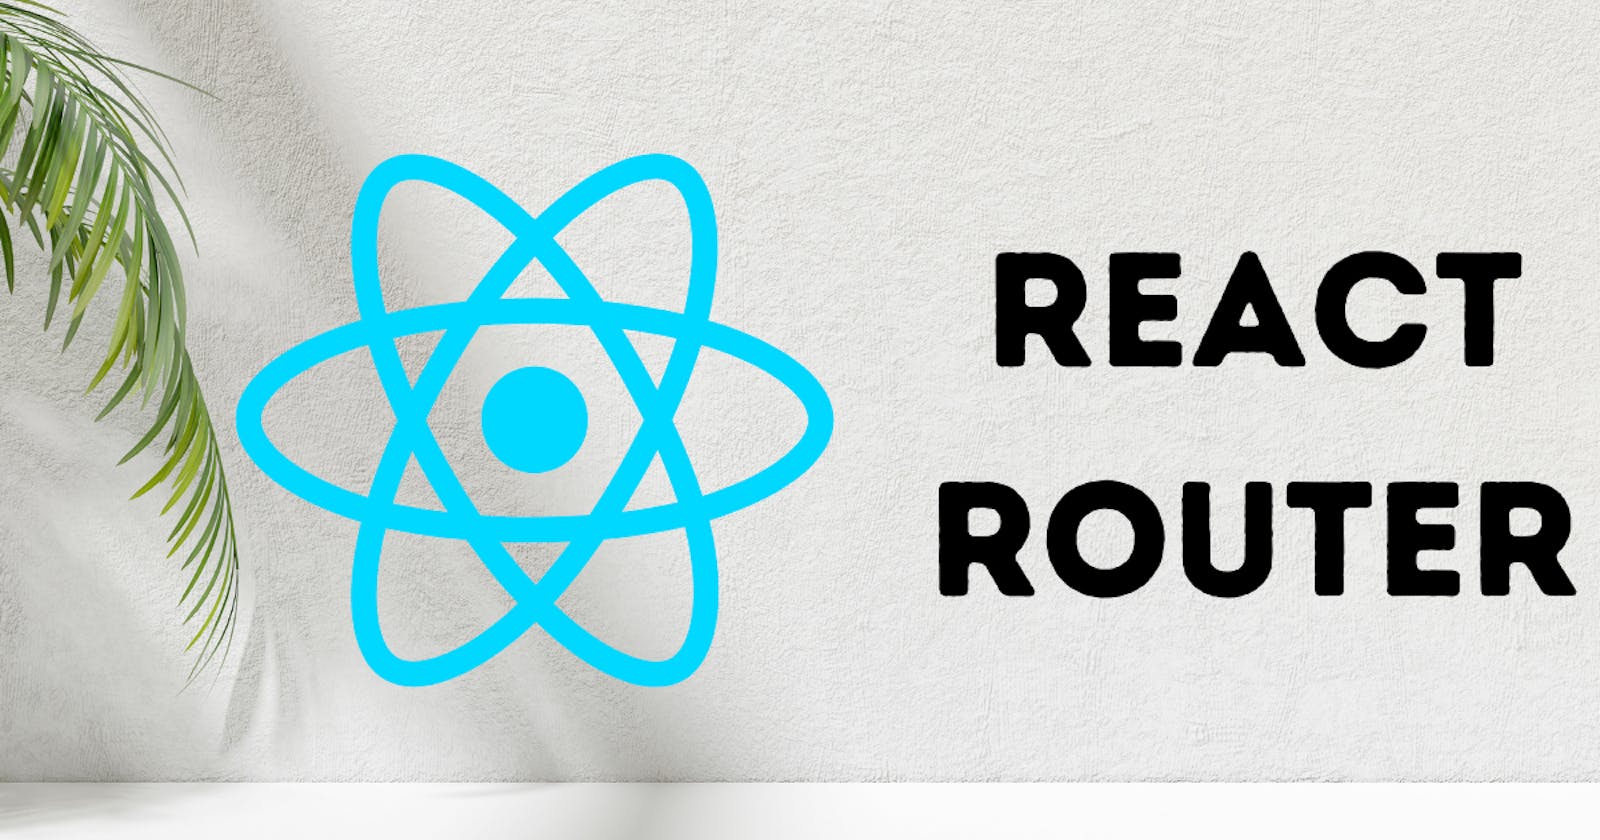 React Router: Implementing navigation in React applications